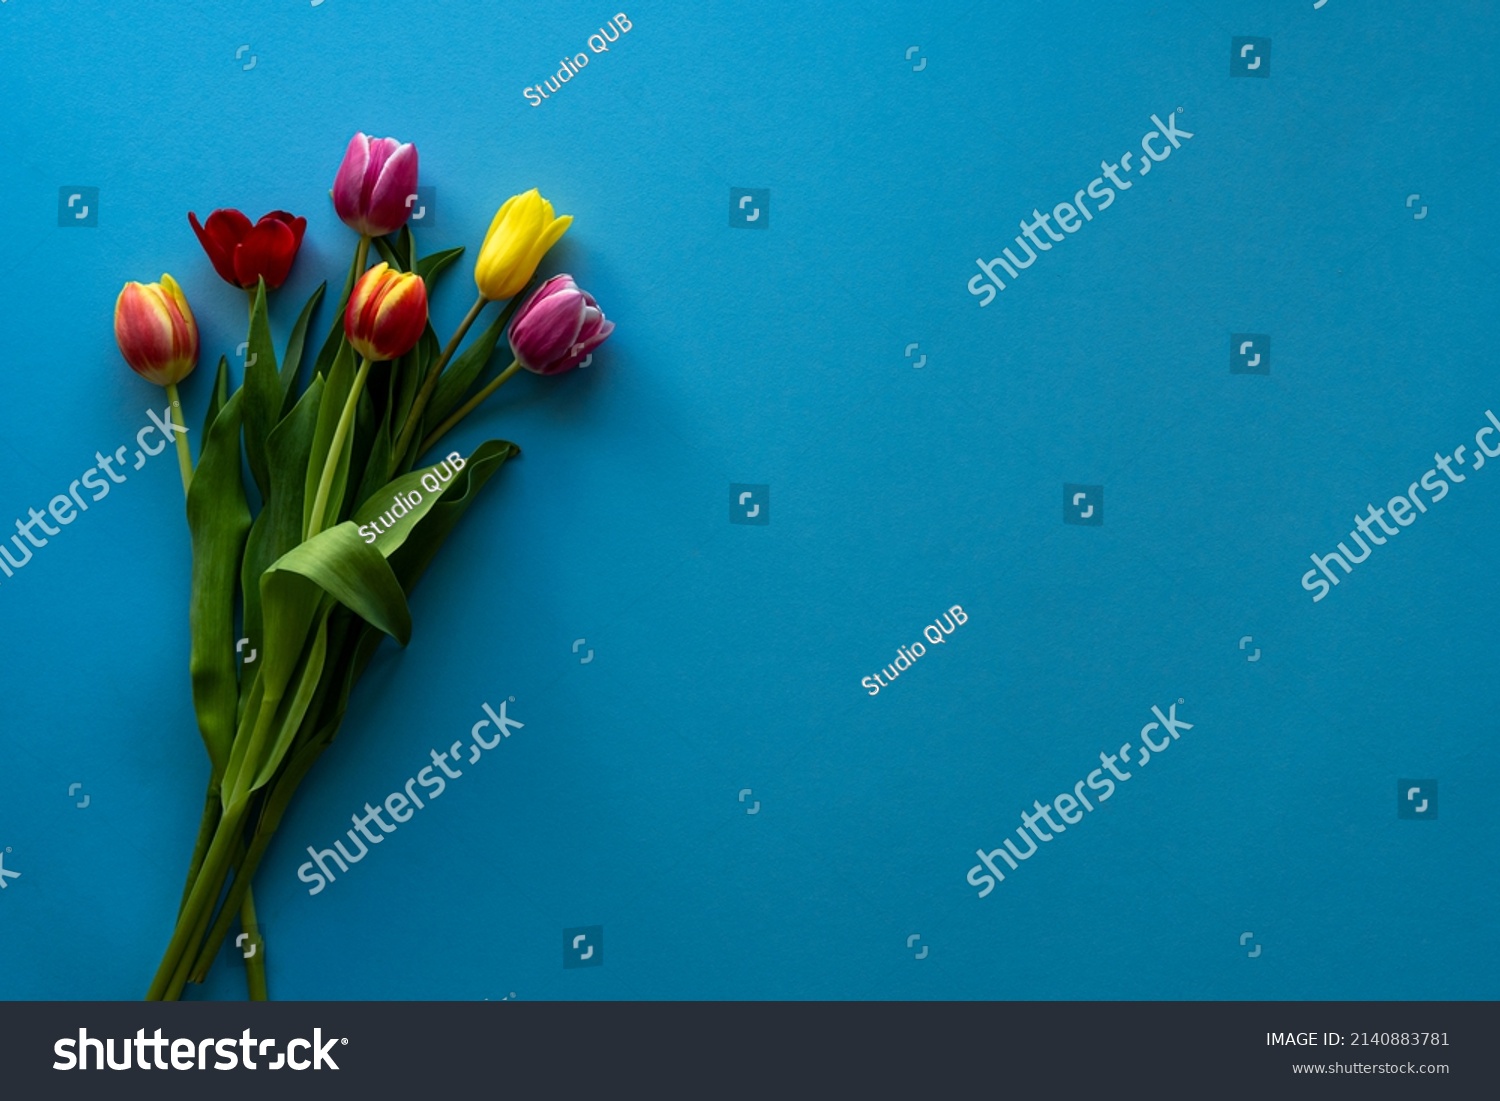 Multicolored tulips on blue background with copy space for text. Bouquet of spring flowers. Isolated on blue background. #2140883781